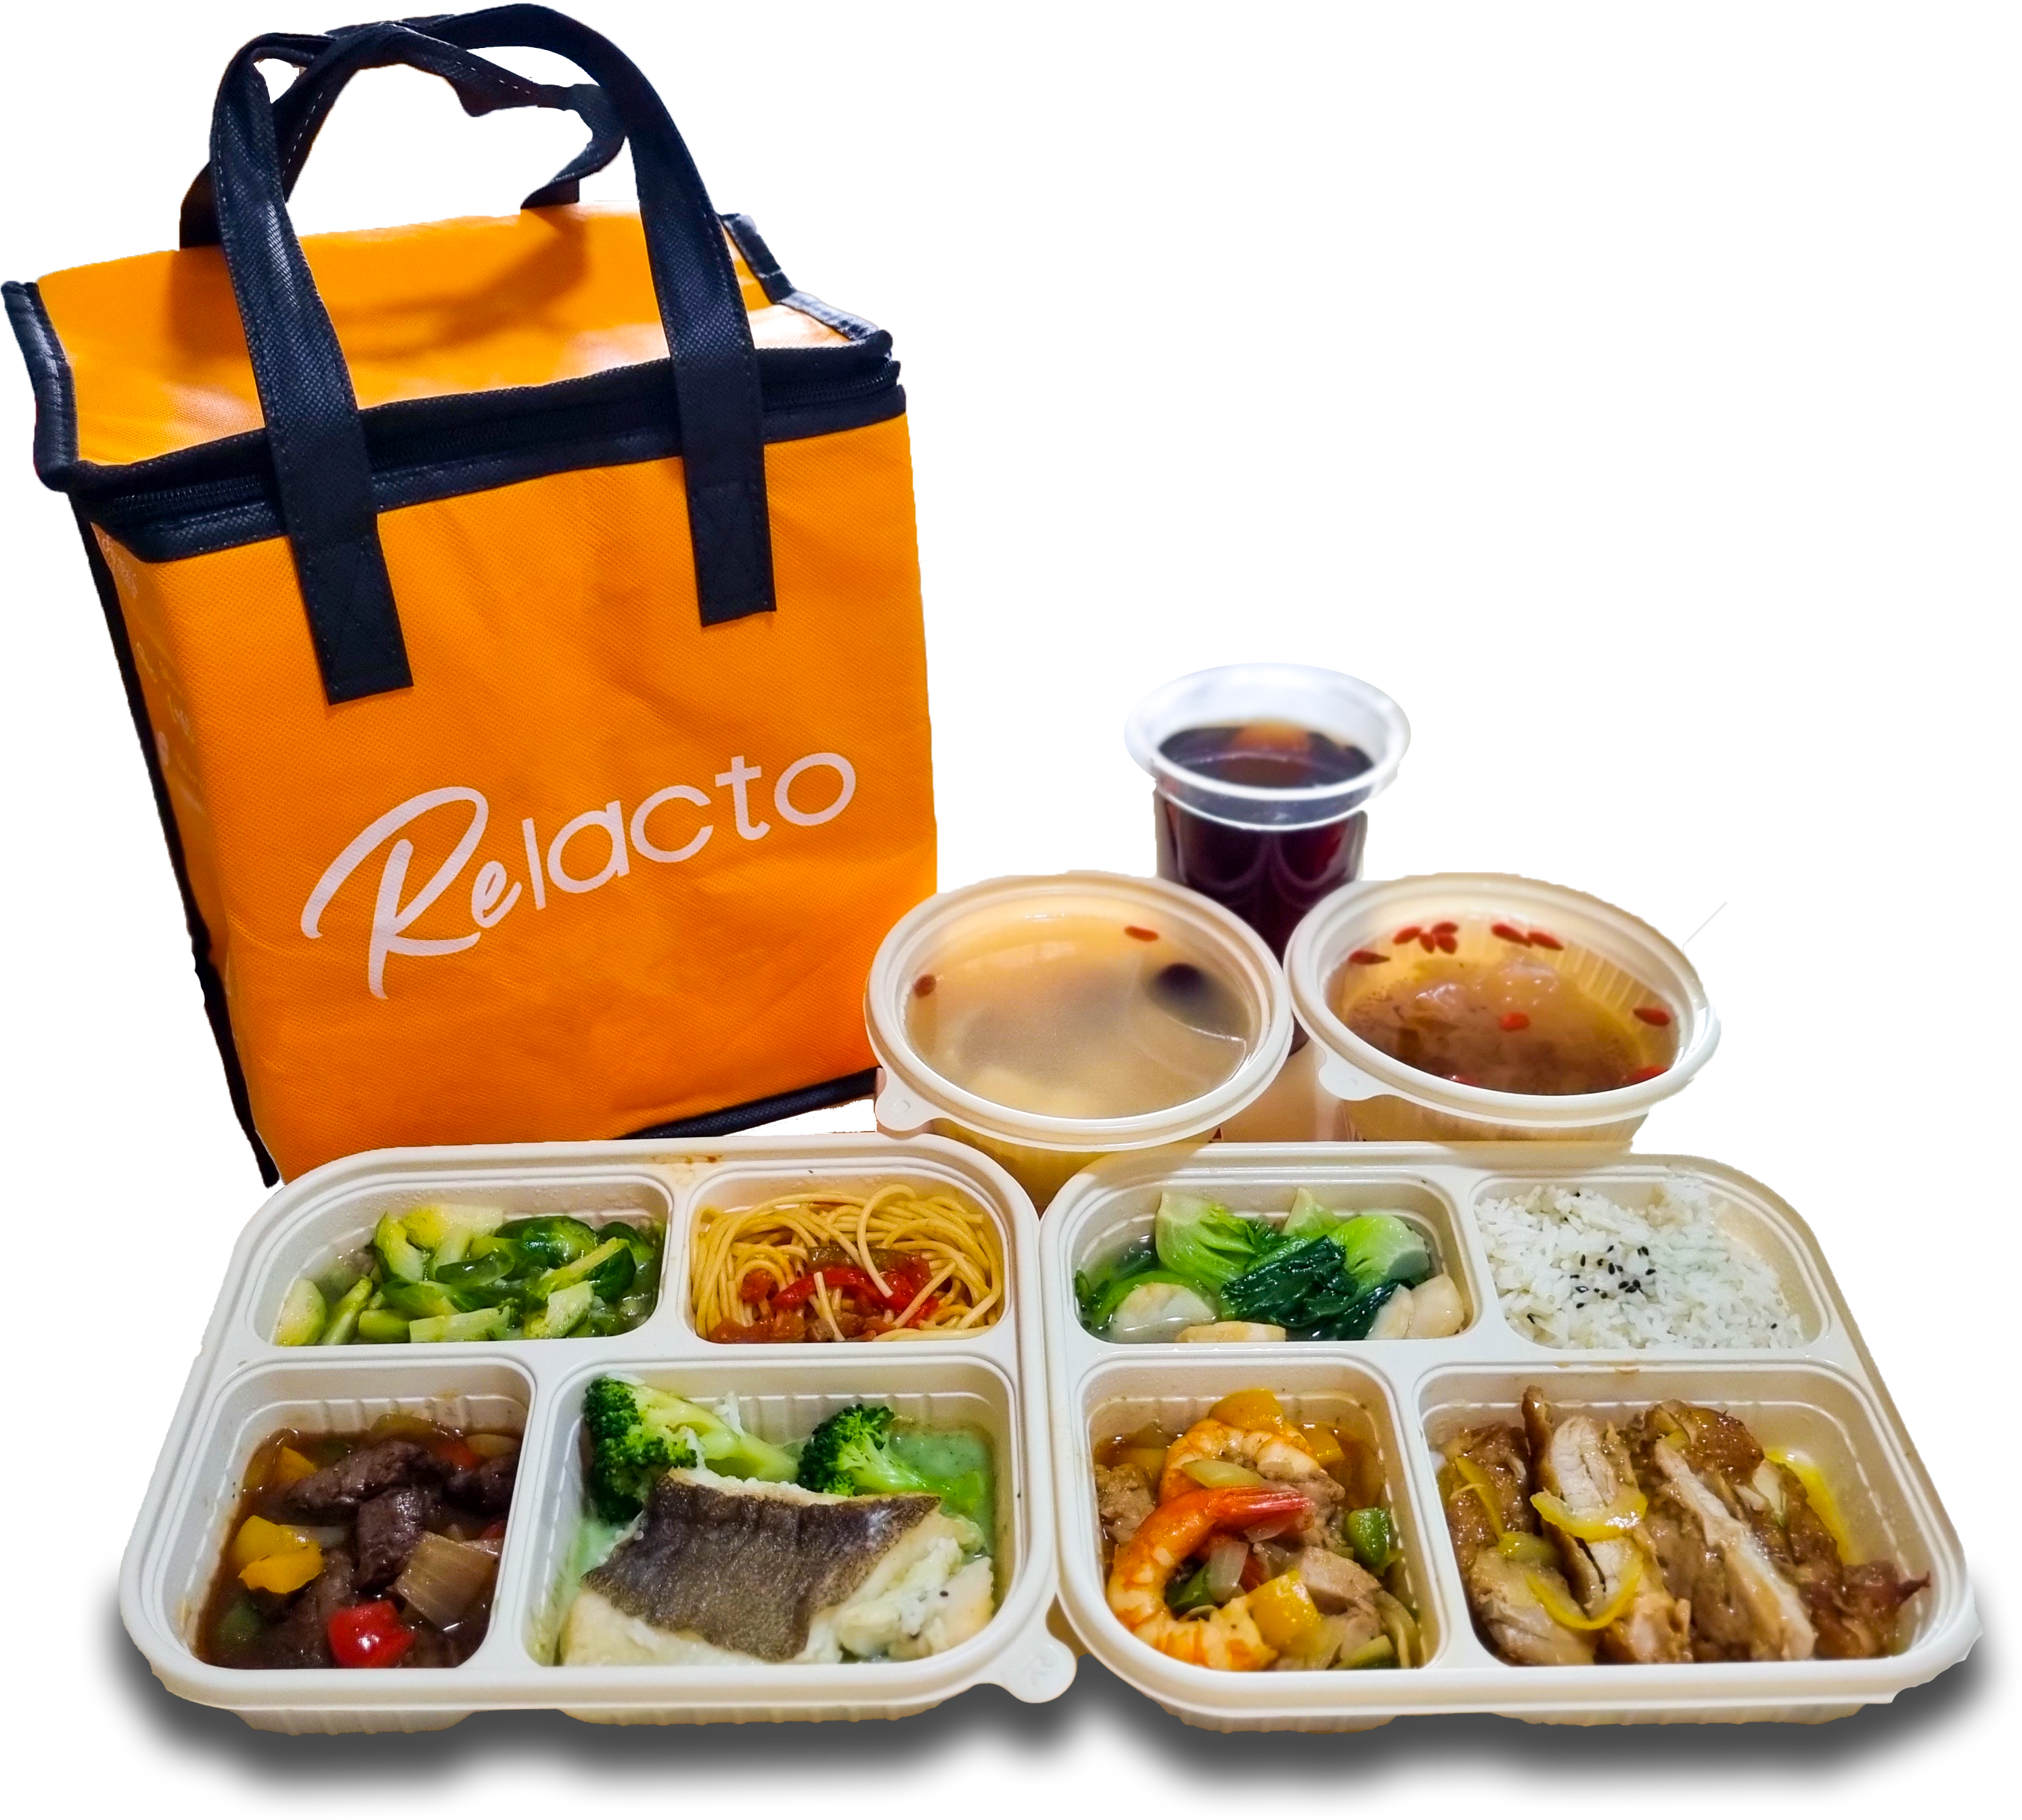 Relacto - Free Signature Trial Meal